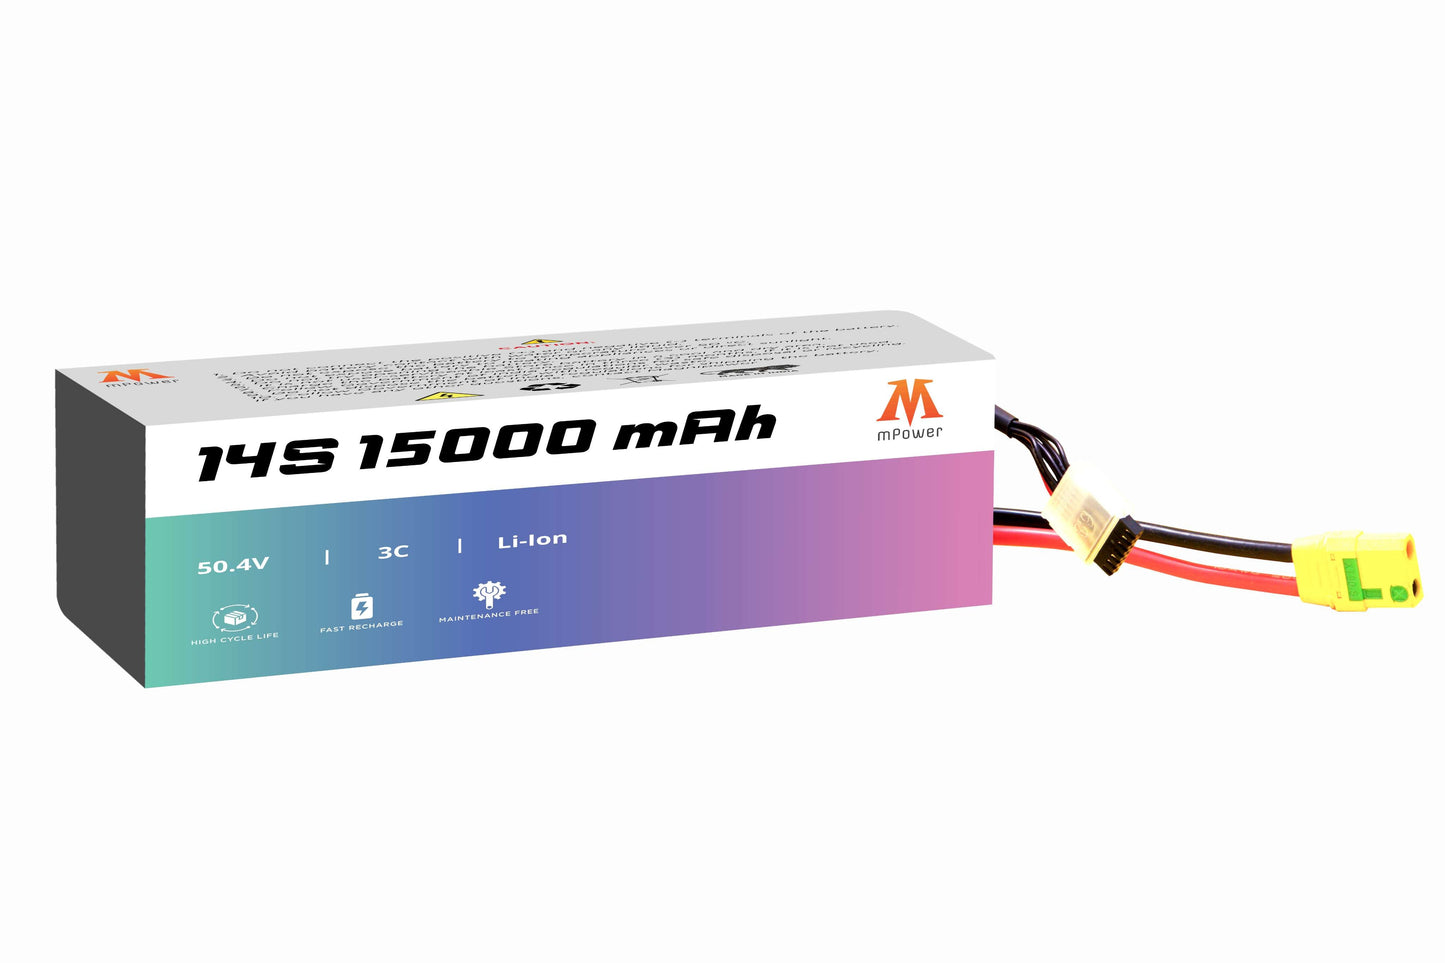 mPower 14S 15000mAh Lithium-Ion Battery for Surveillance Drones